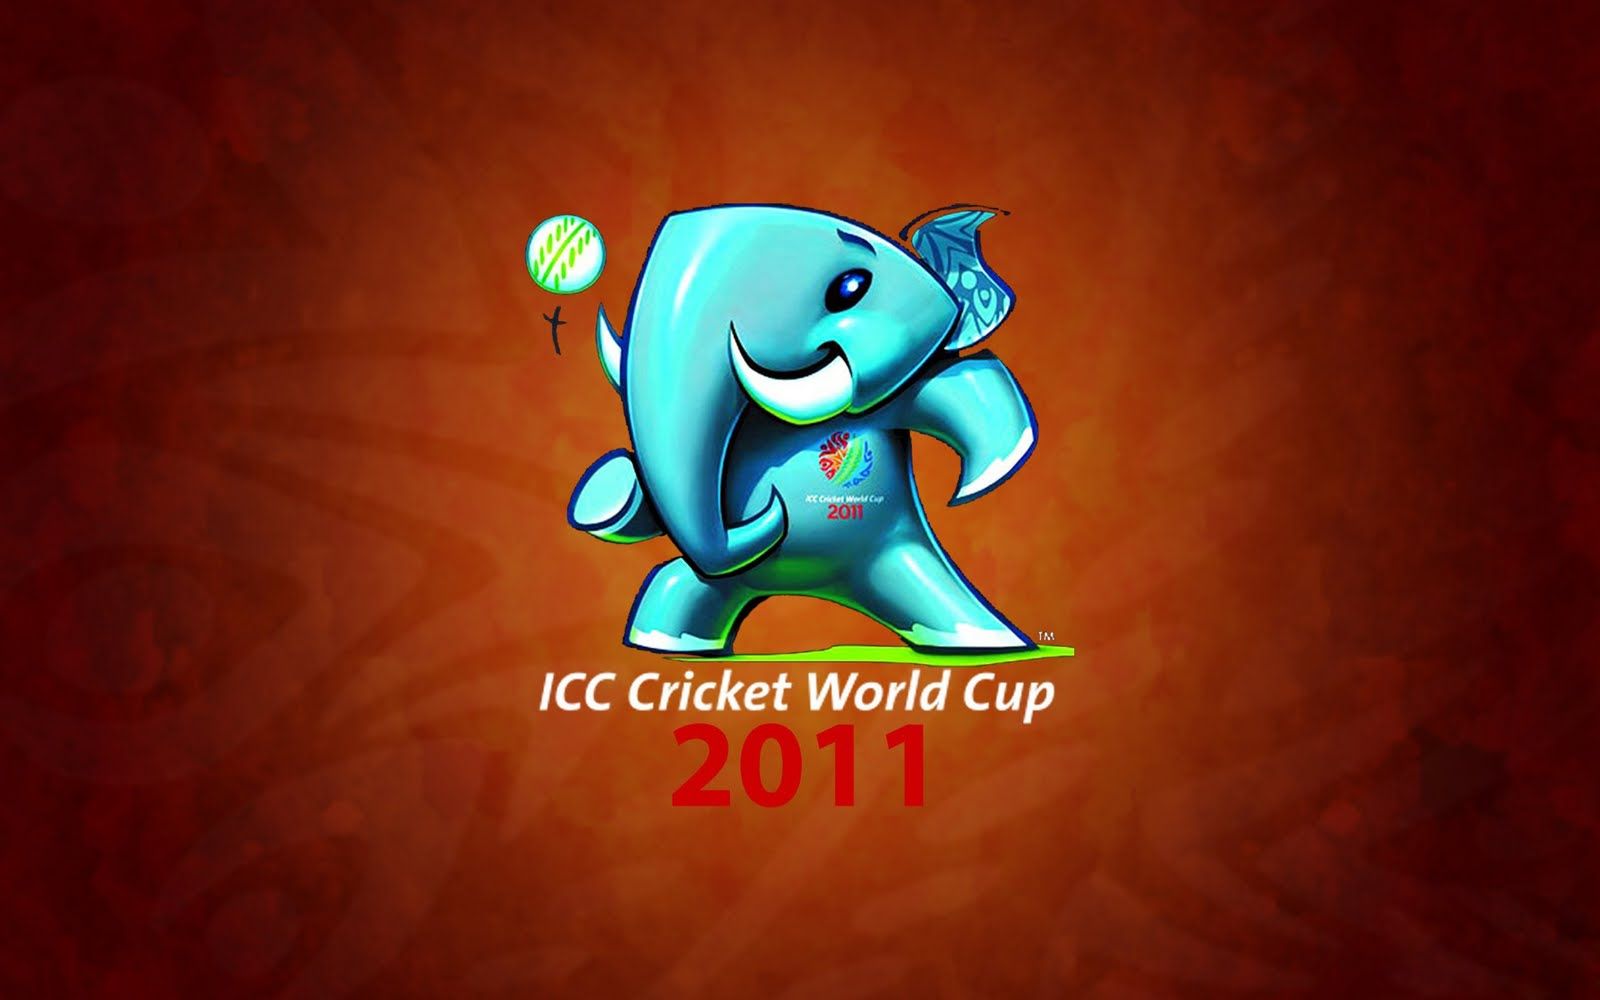 ICC World Cup Wallpaper. Aku Extra Thicc Wallpaper, ICC World Cup Wallpaper and ICC World Cup Background